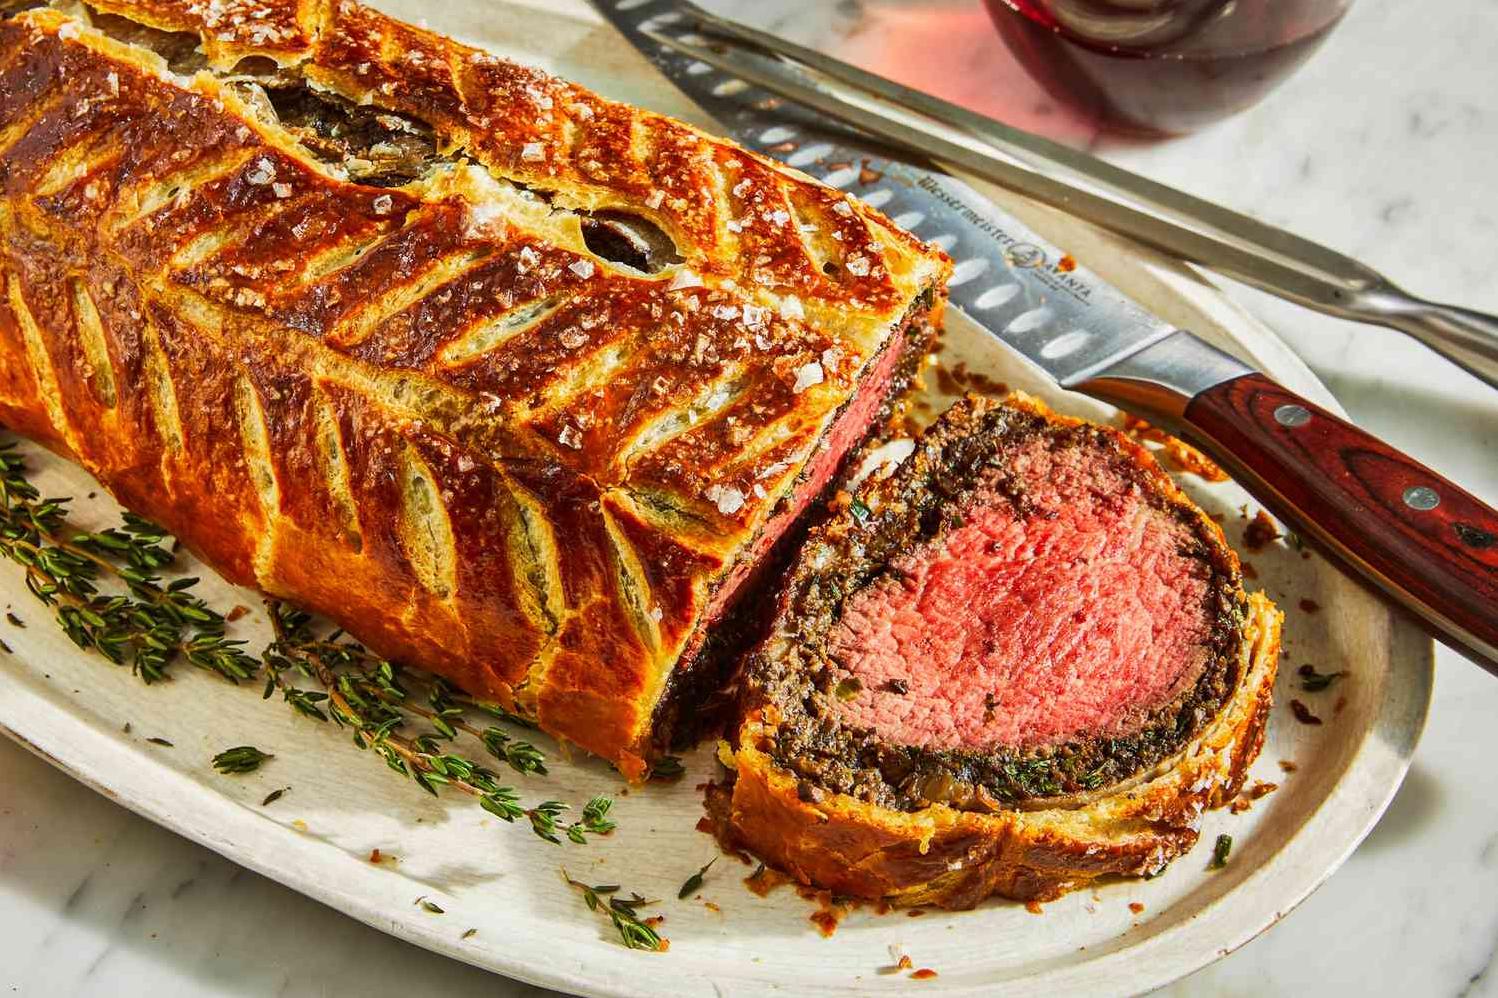  A cross-section of delectable Beef Wellington with a golden-brown crust